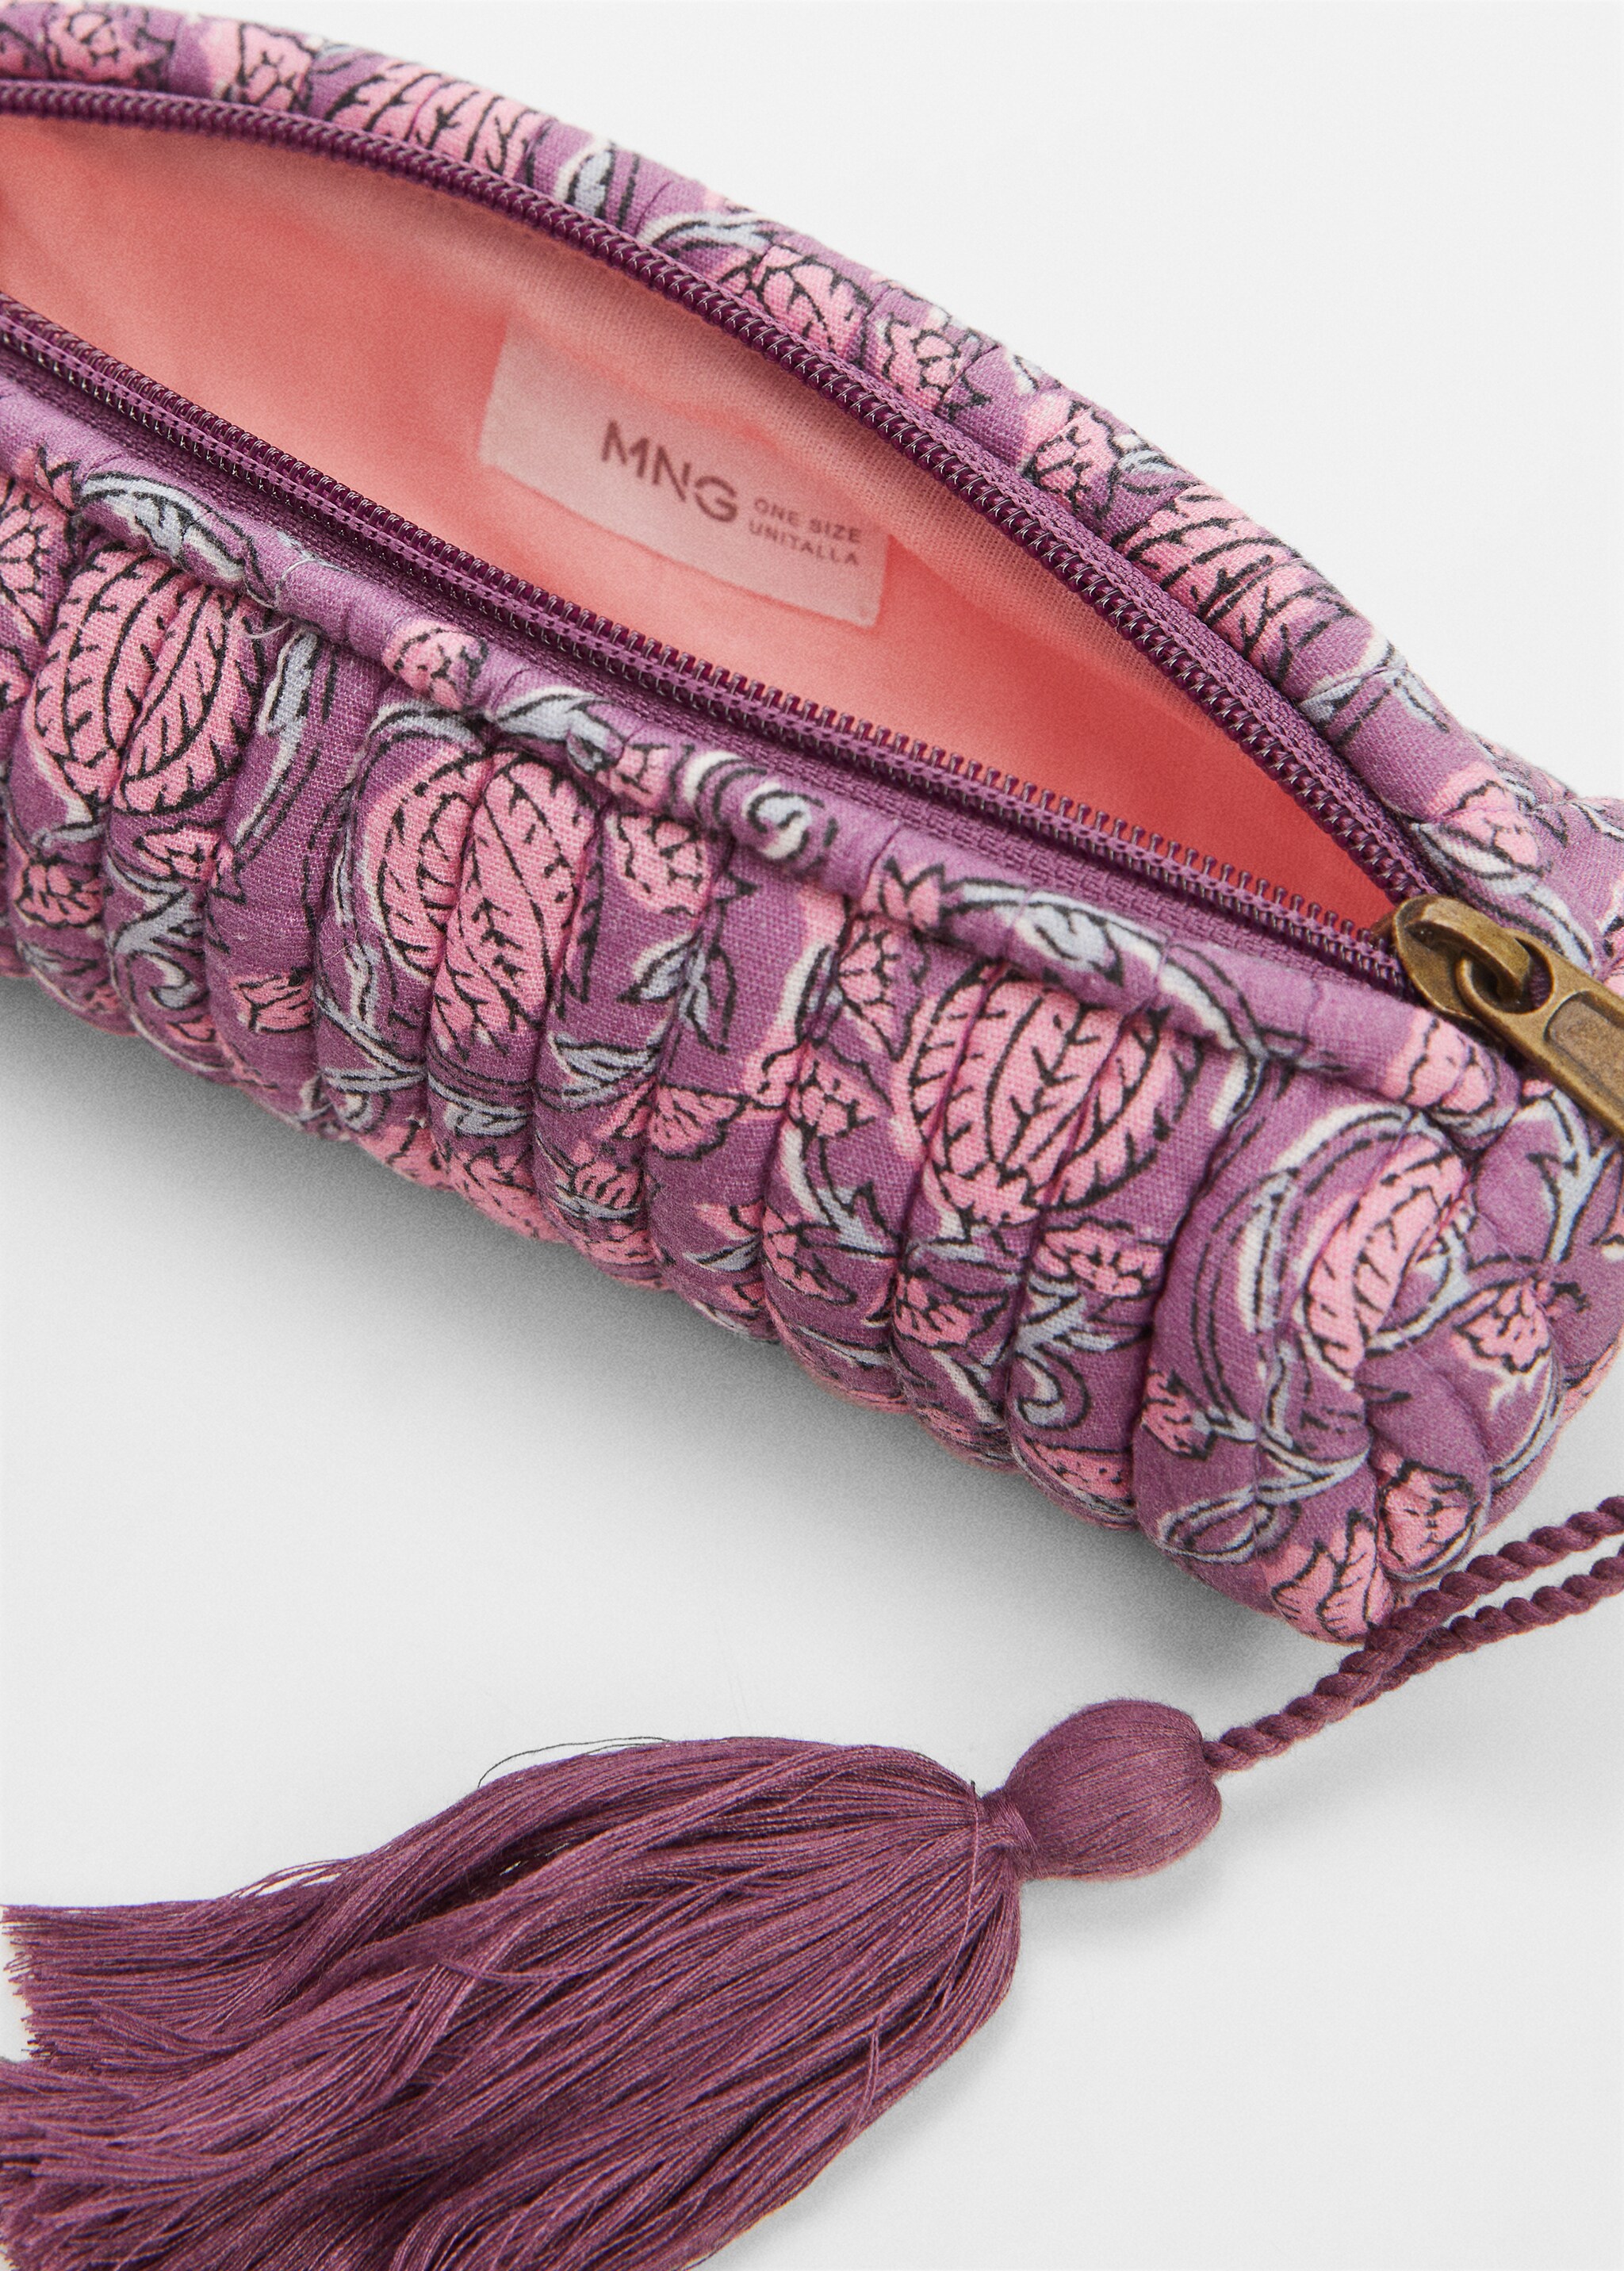 Printed pencil case - Details of the article 1